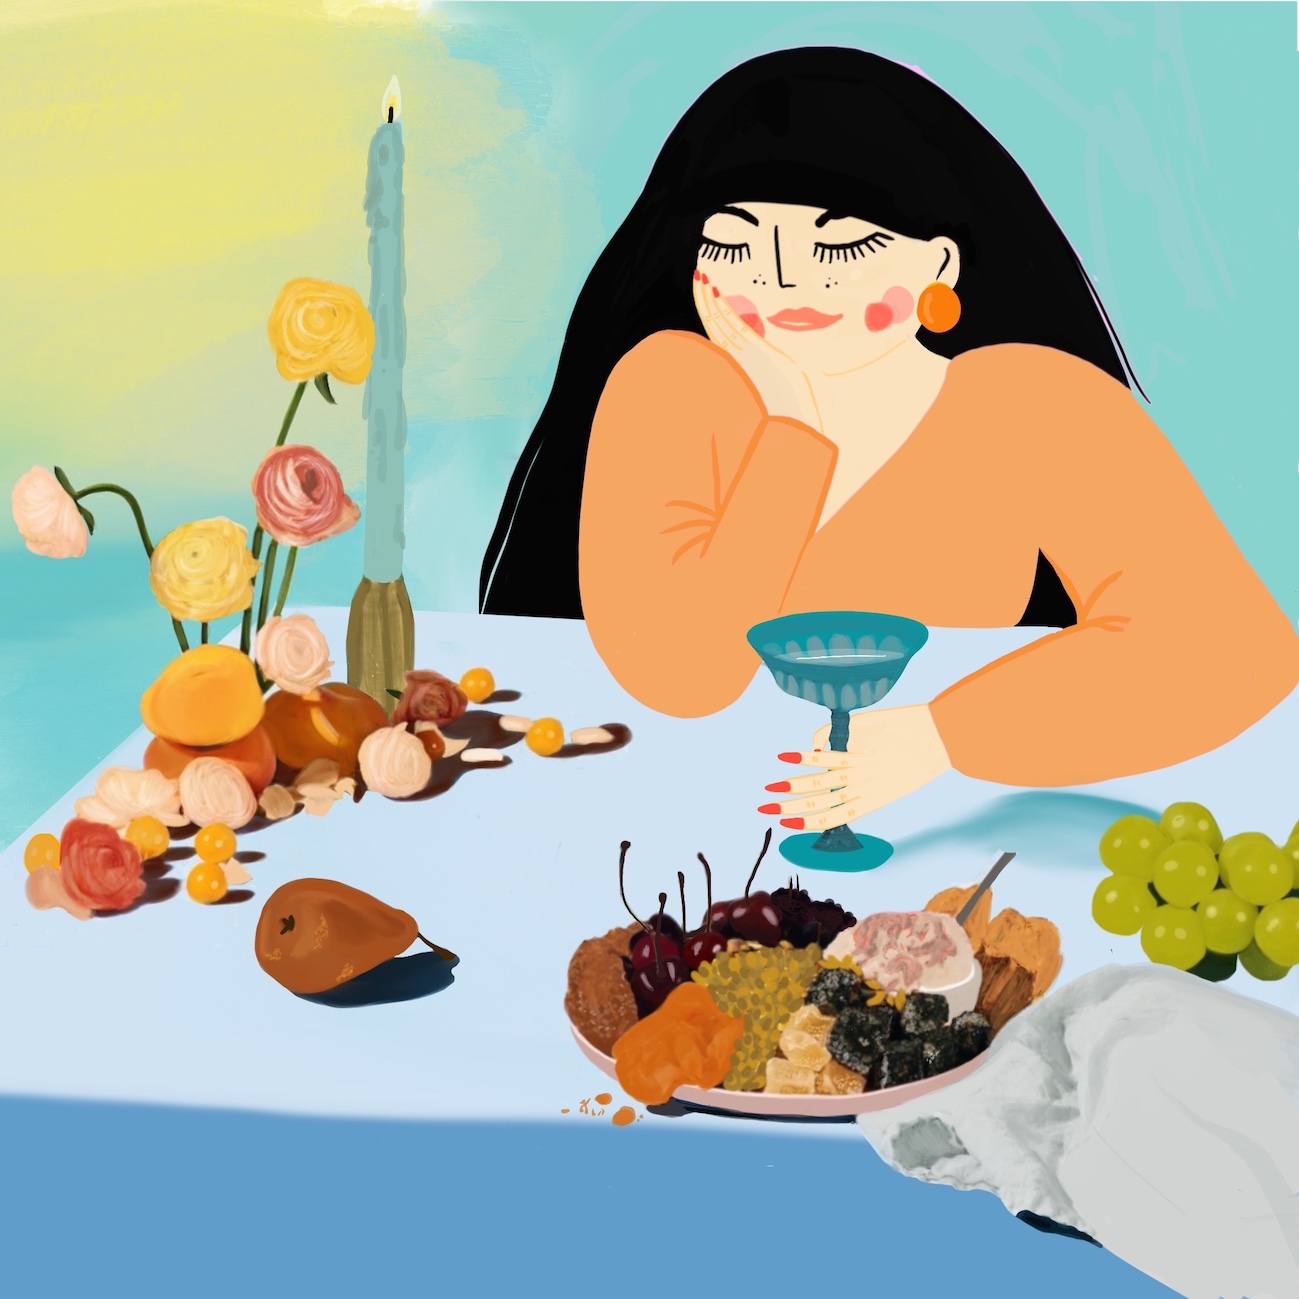 illustration of woman with orange sweater, sat at a dining table, the table has fruit and a candle stick on it, she is holding a wine glass